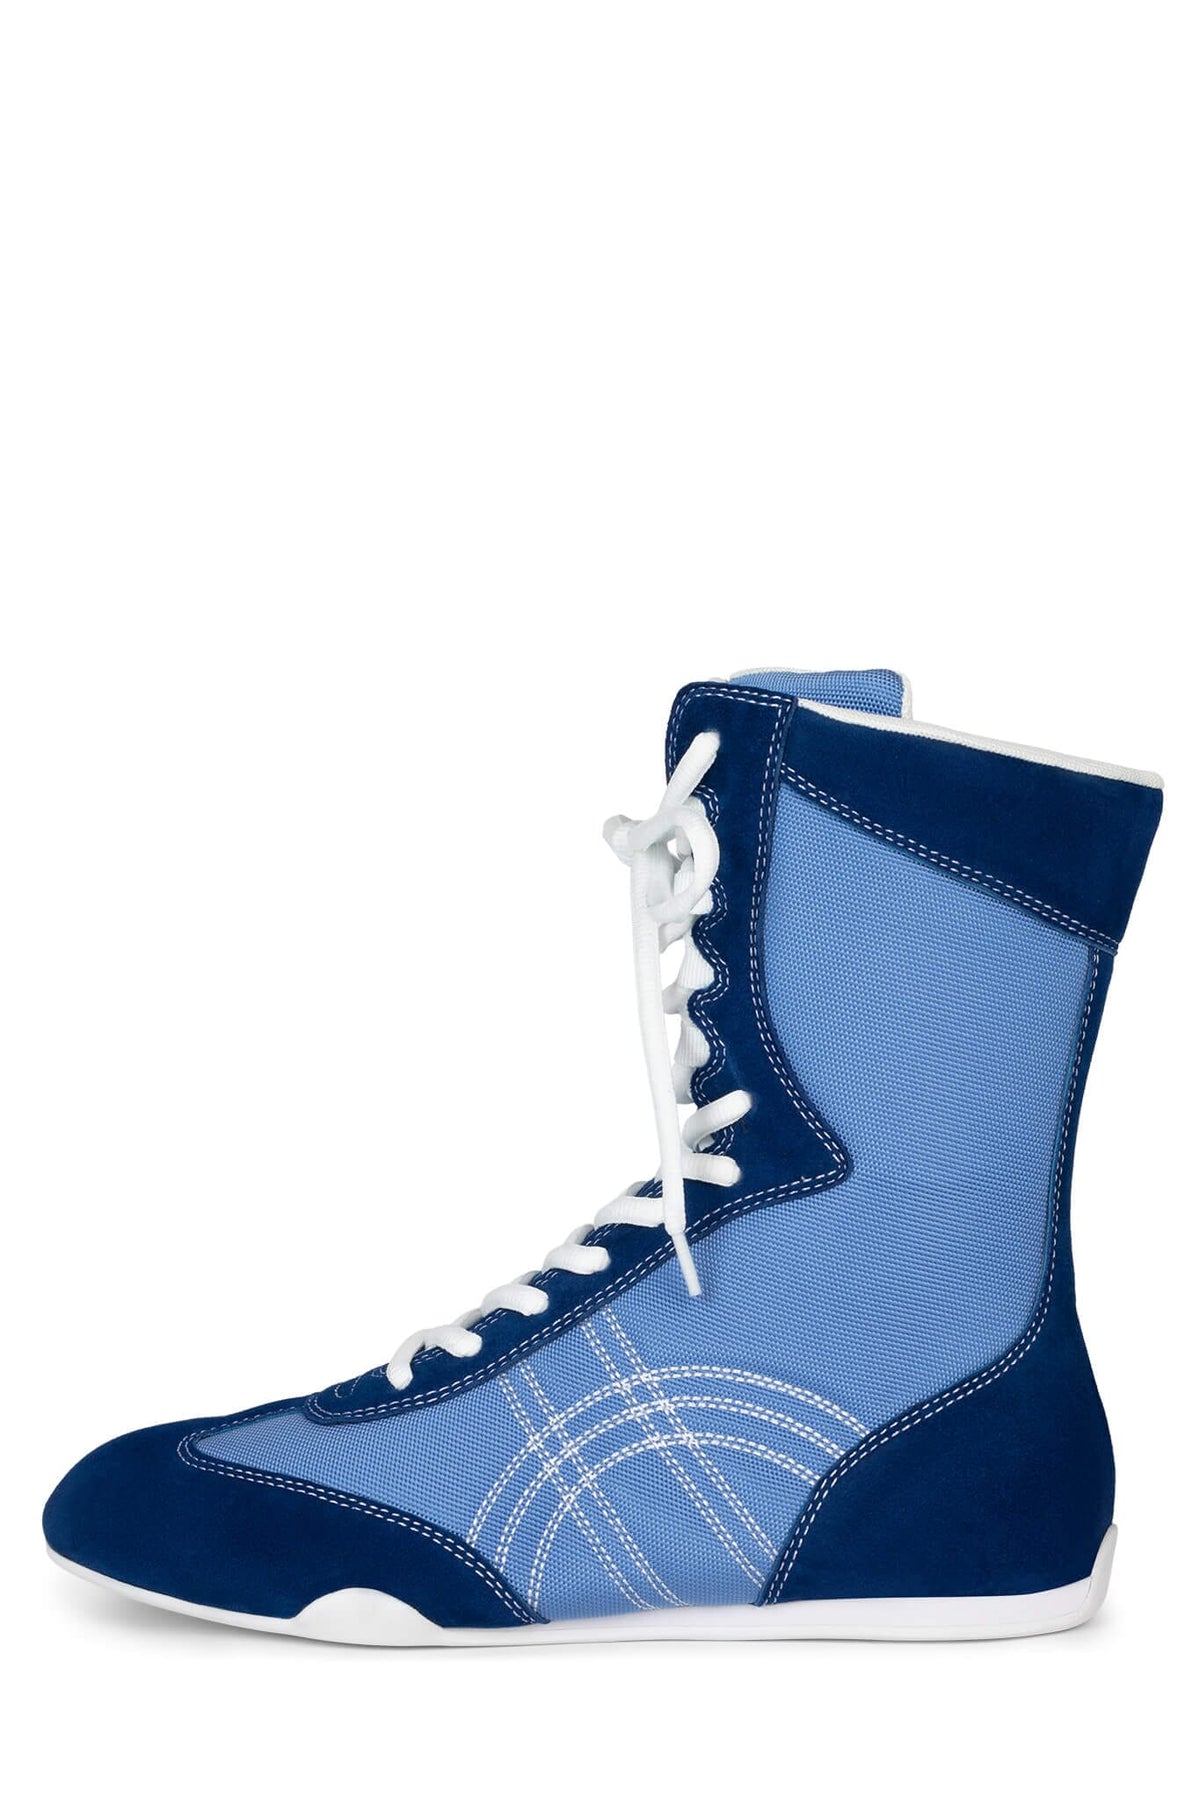 BOXING-LO (Pre-order) Mid-Calf Boot Jeffrey Campbell Blue White Combo 6 